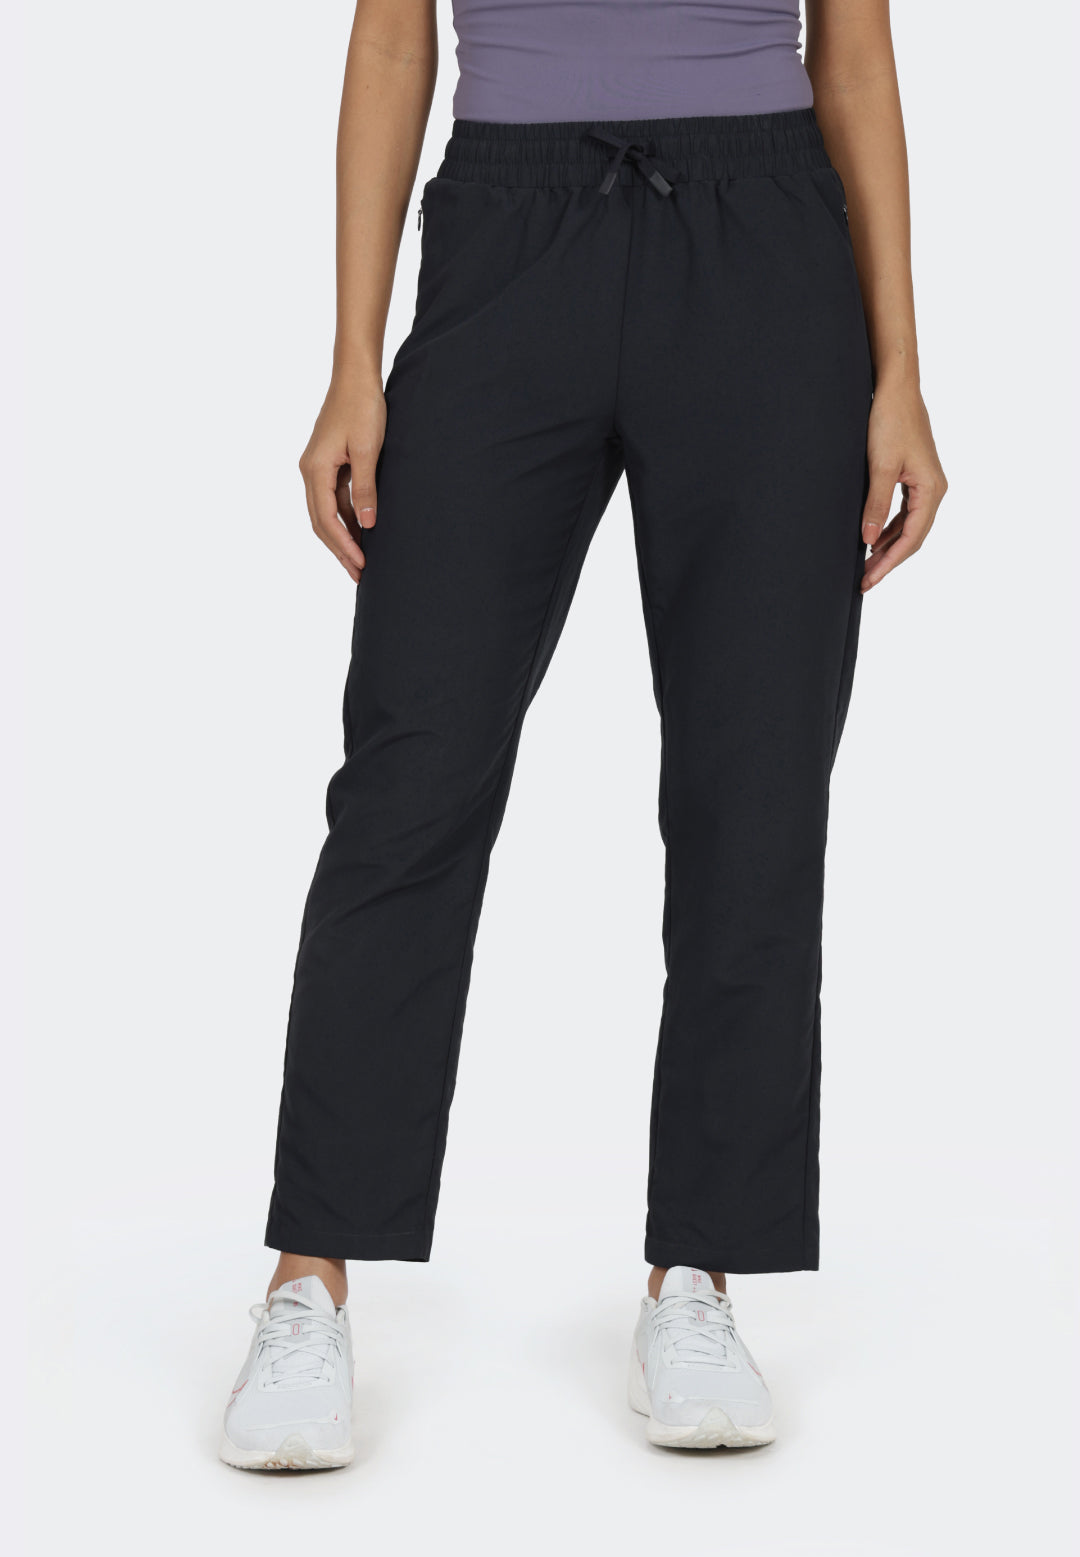 Buy Plus Size Track Pants for Women Online from Blissclub